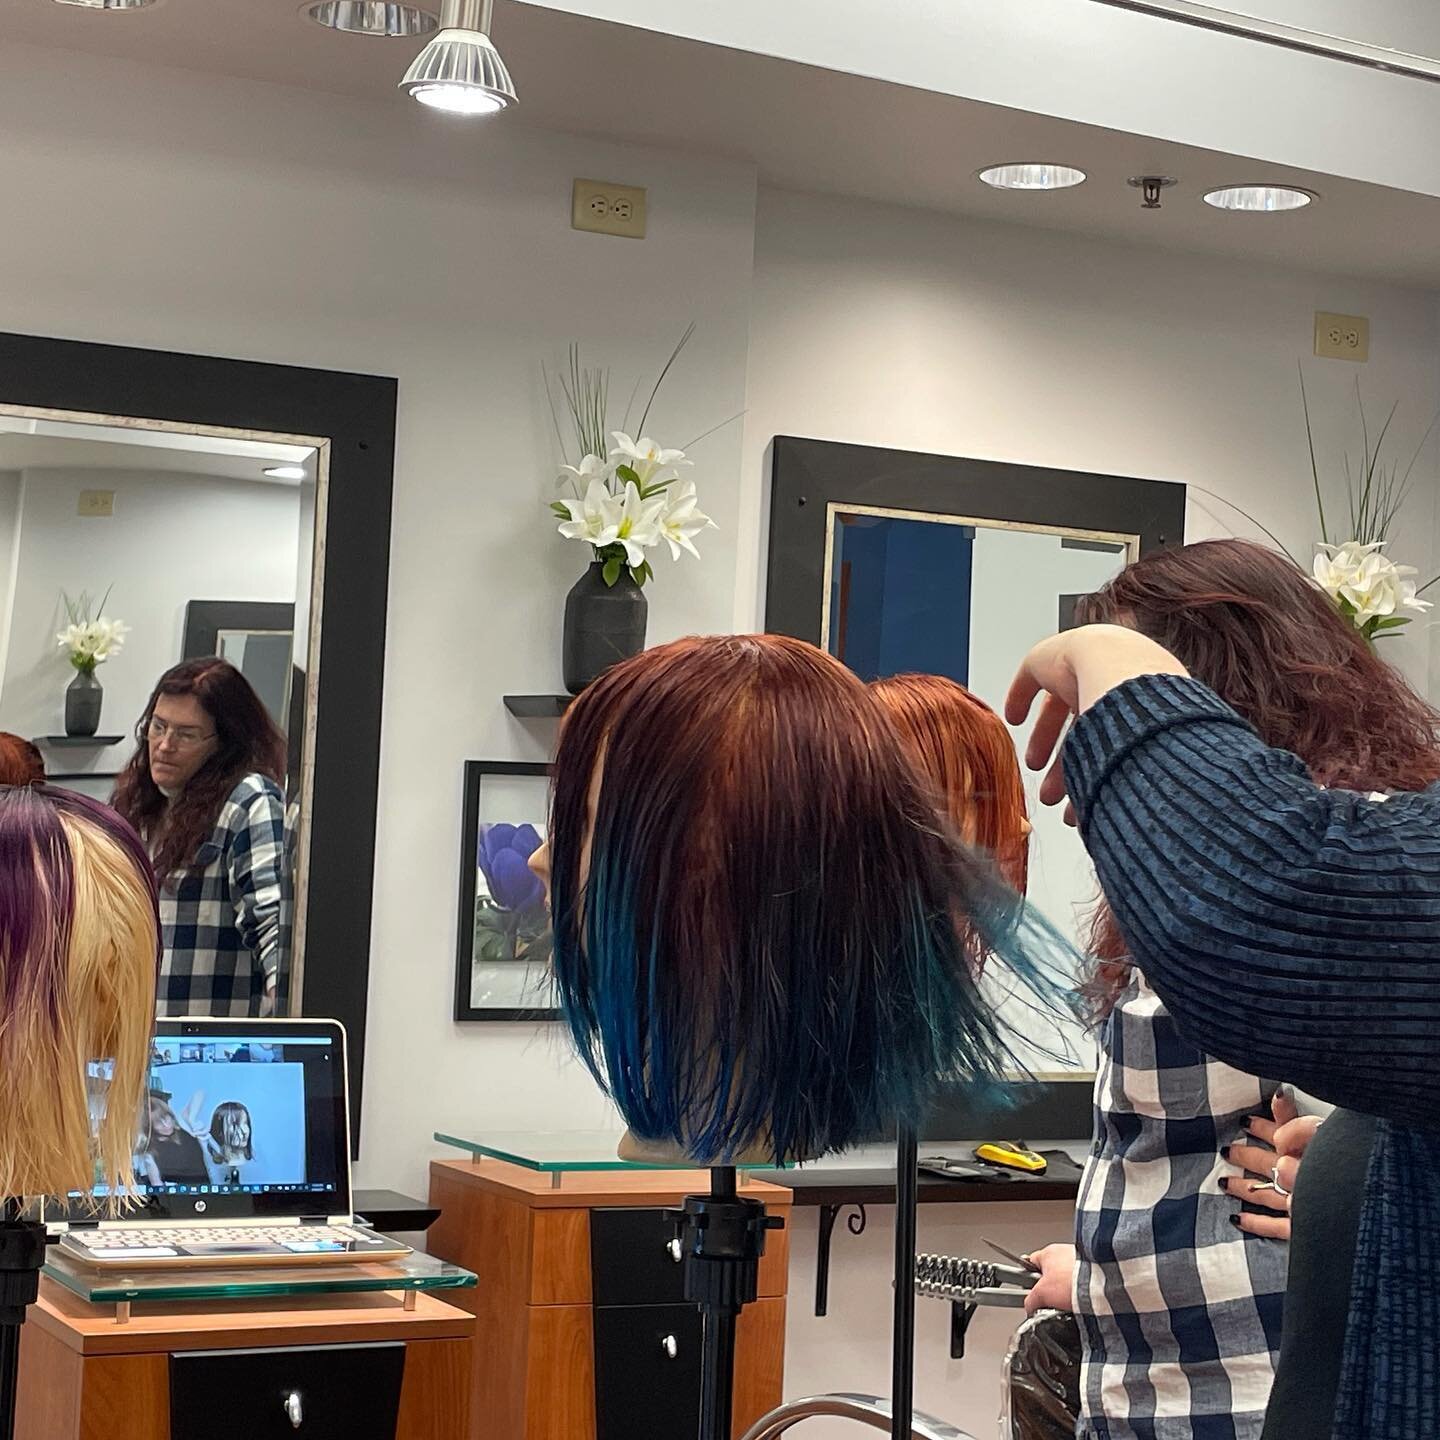 Wilson method cutting class today! We can&rsquo;t wait to share what we learned! #wilsoncreative #wilsoncollectivepros #wilsonmethodcutting #extonsalon#eagleviewtowncenter